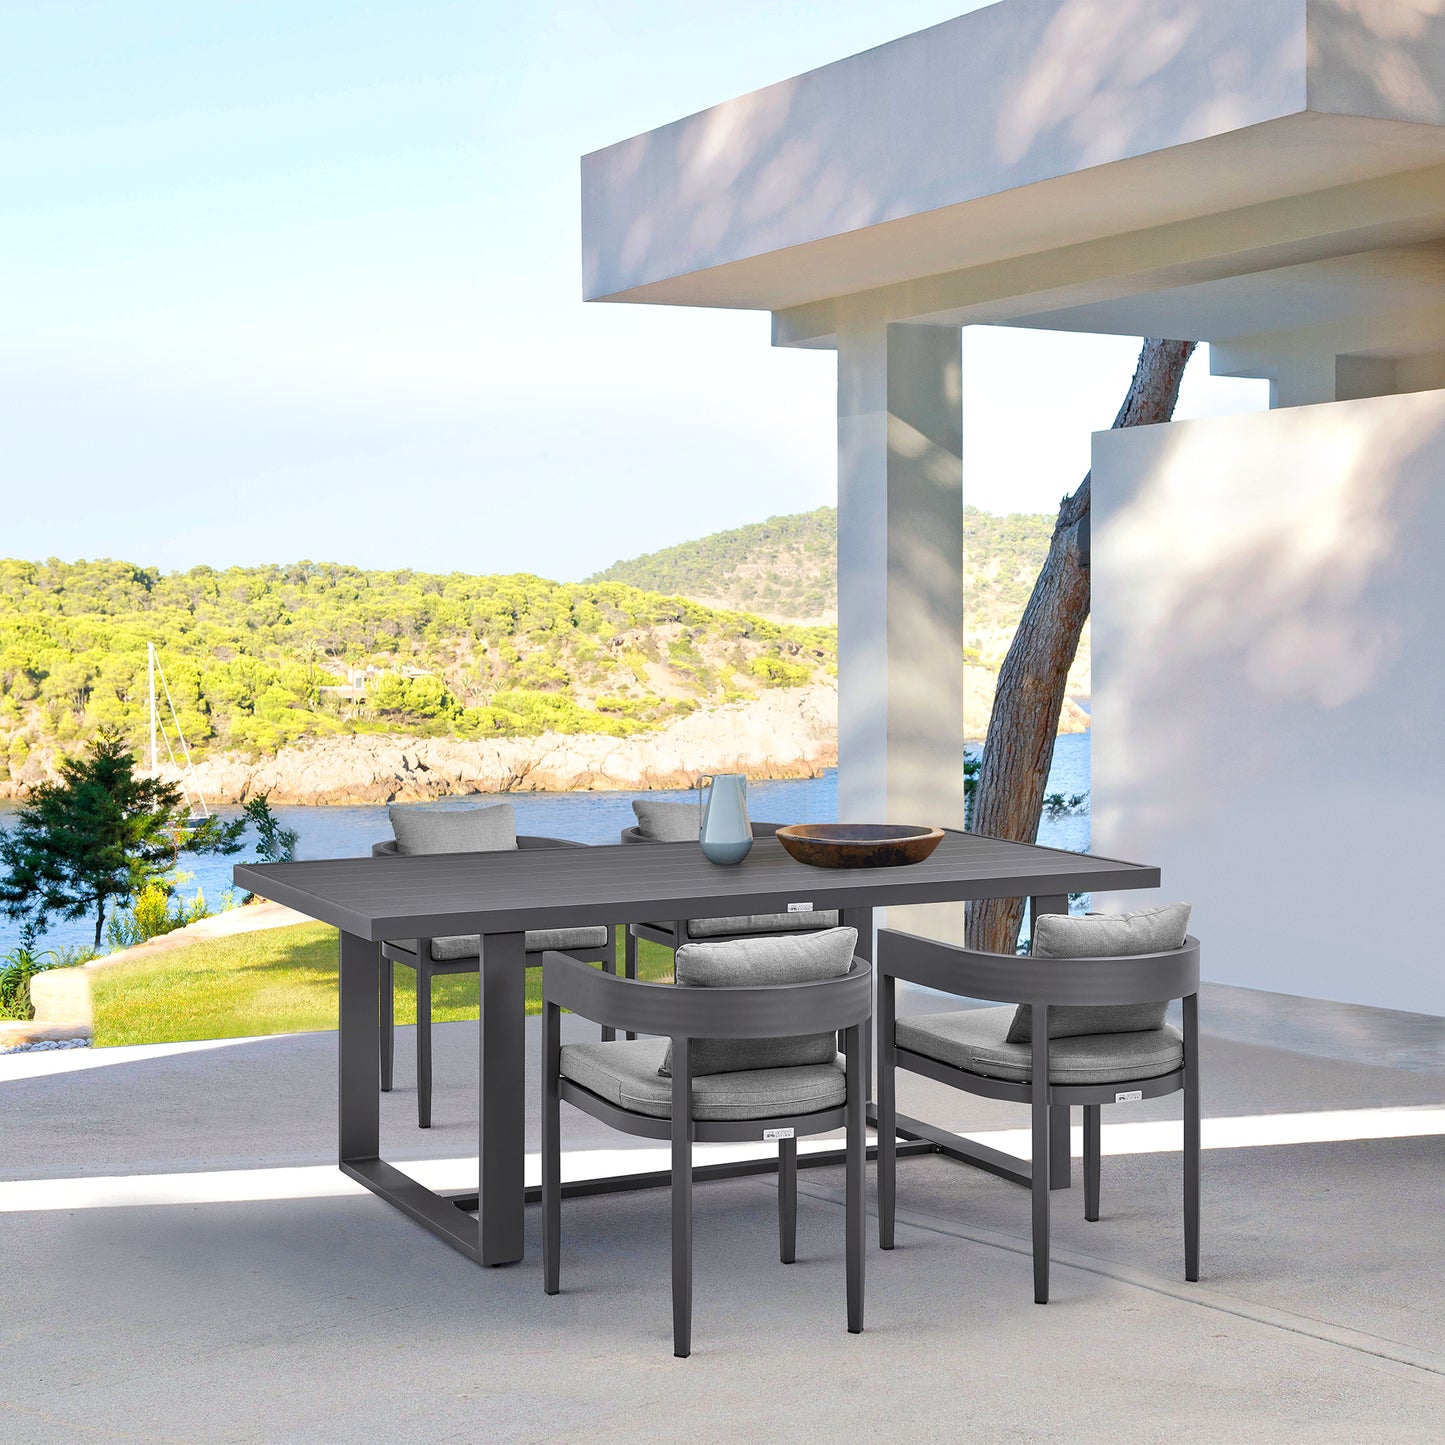 Menorca Outdoor Patio 5-Piece Dining Table Set in Aluminum with Gray Cushions